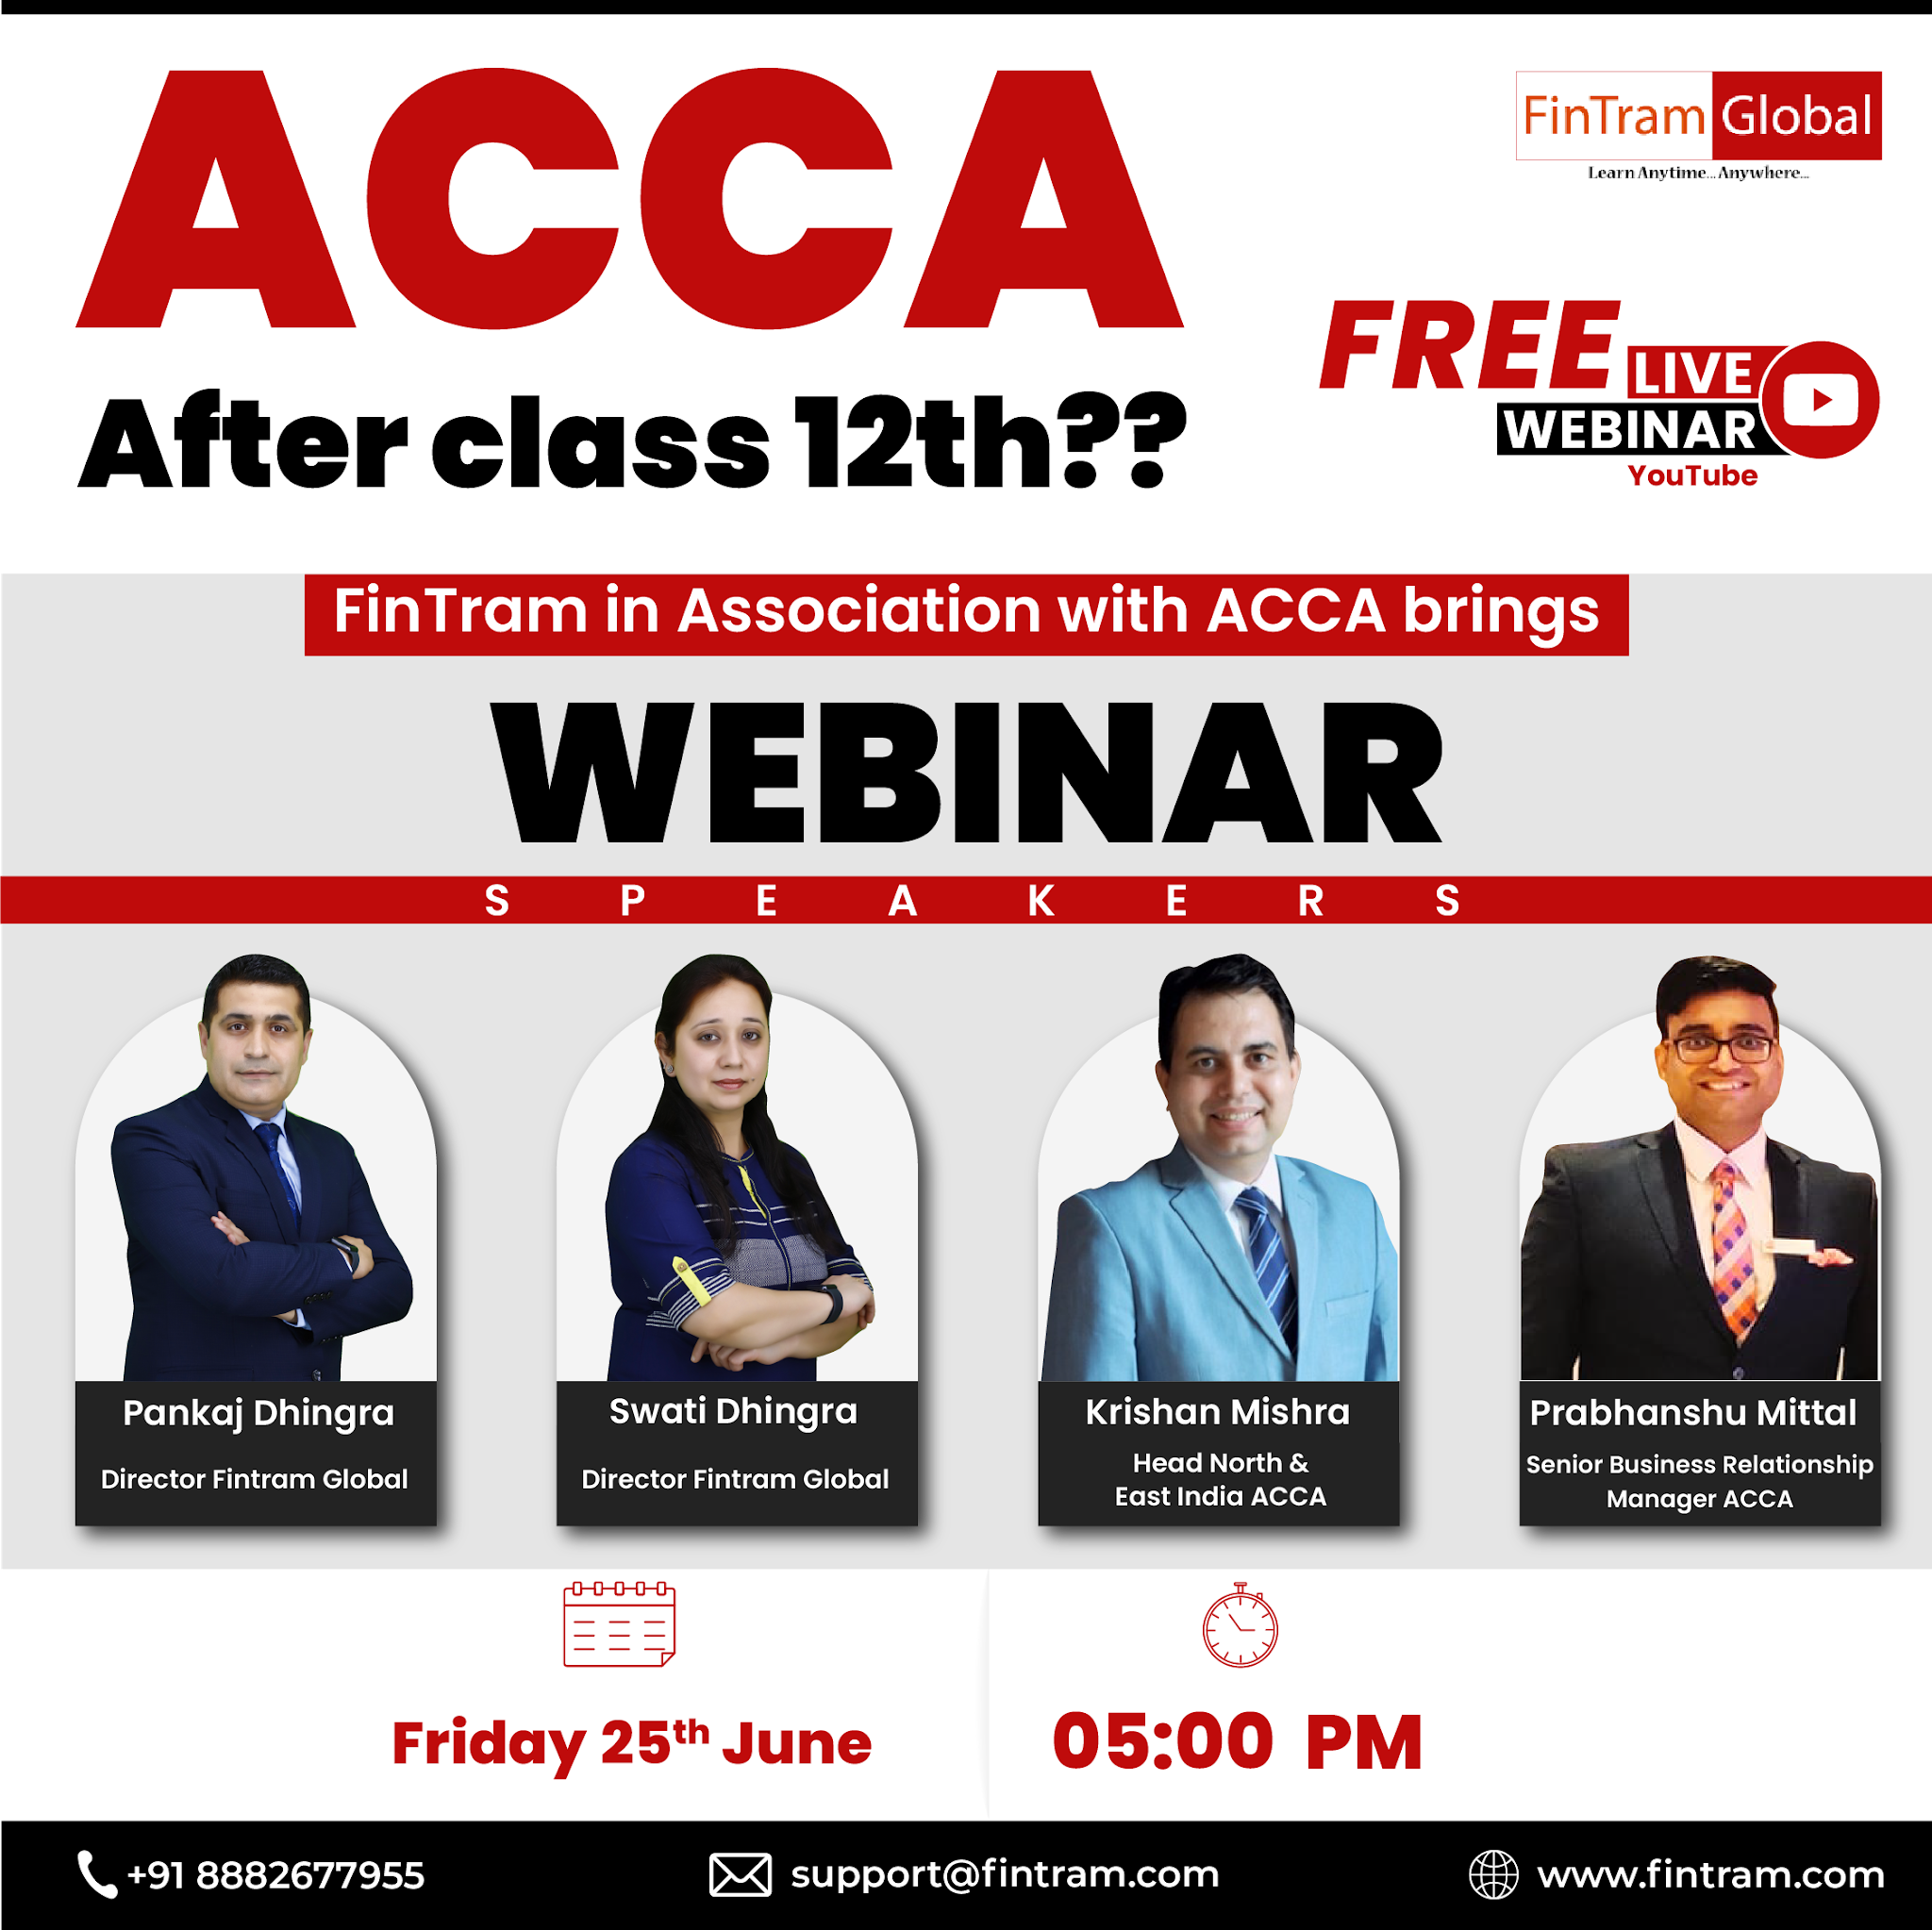 Planning for ACCA after class 12th❓, New Delhi, Delhi, India